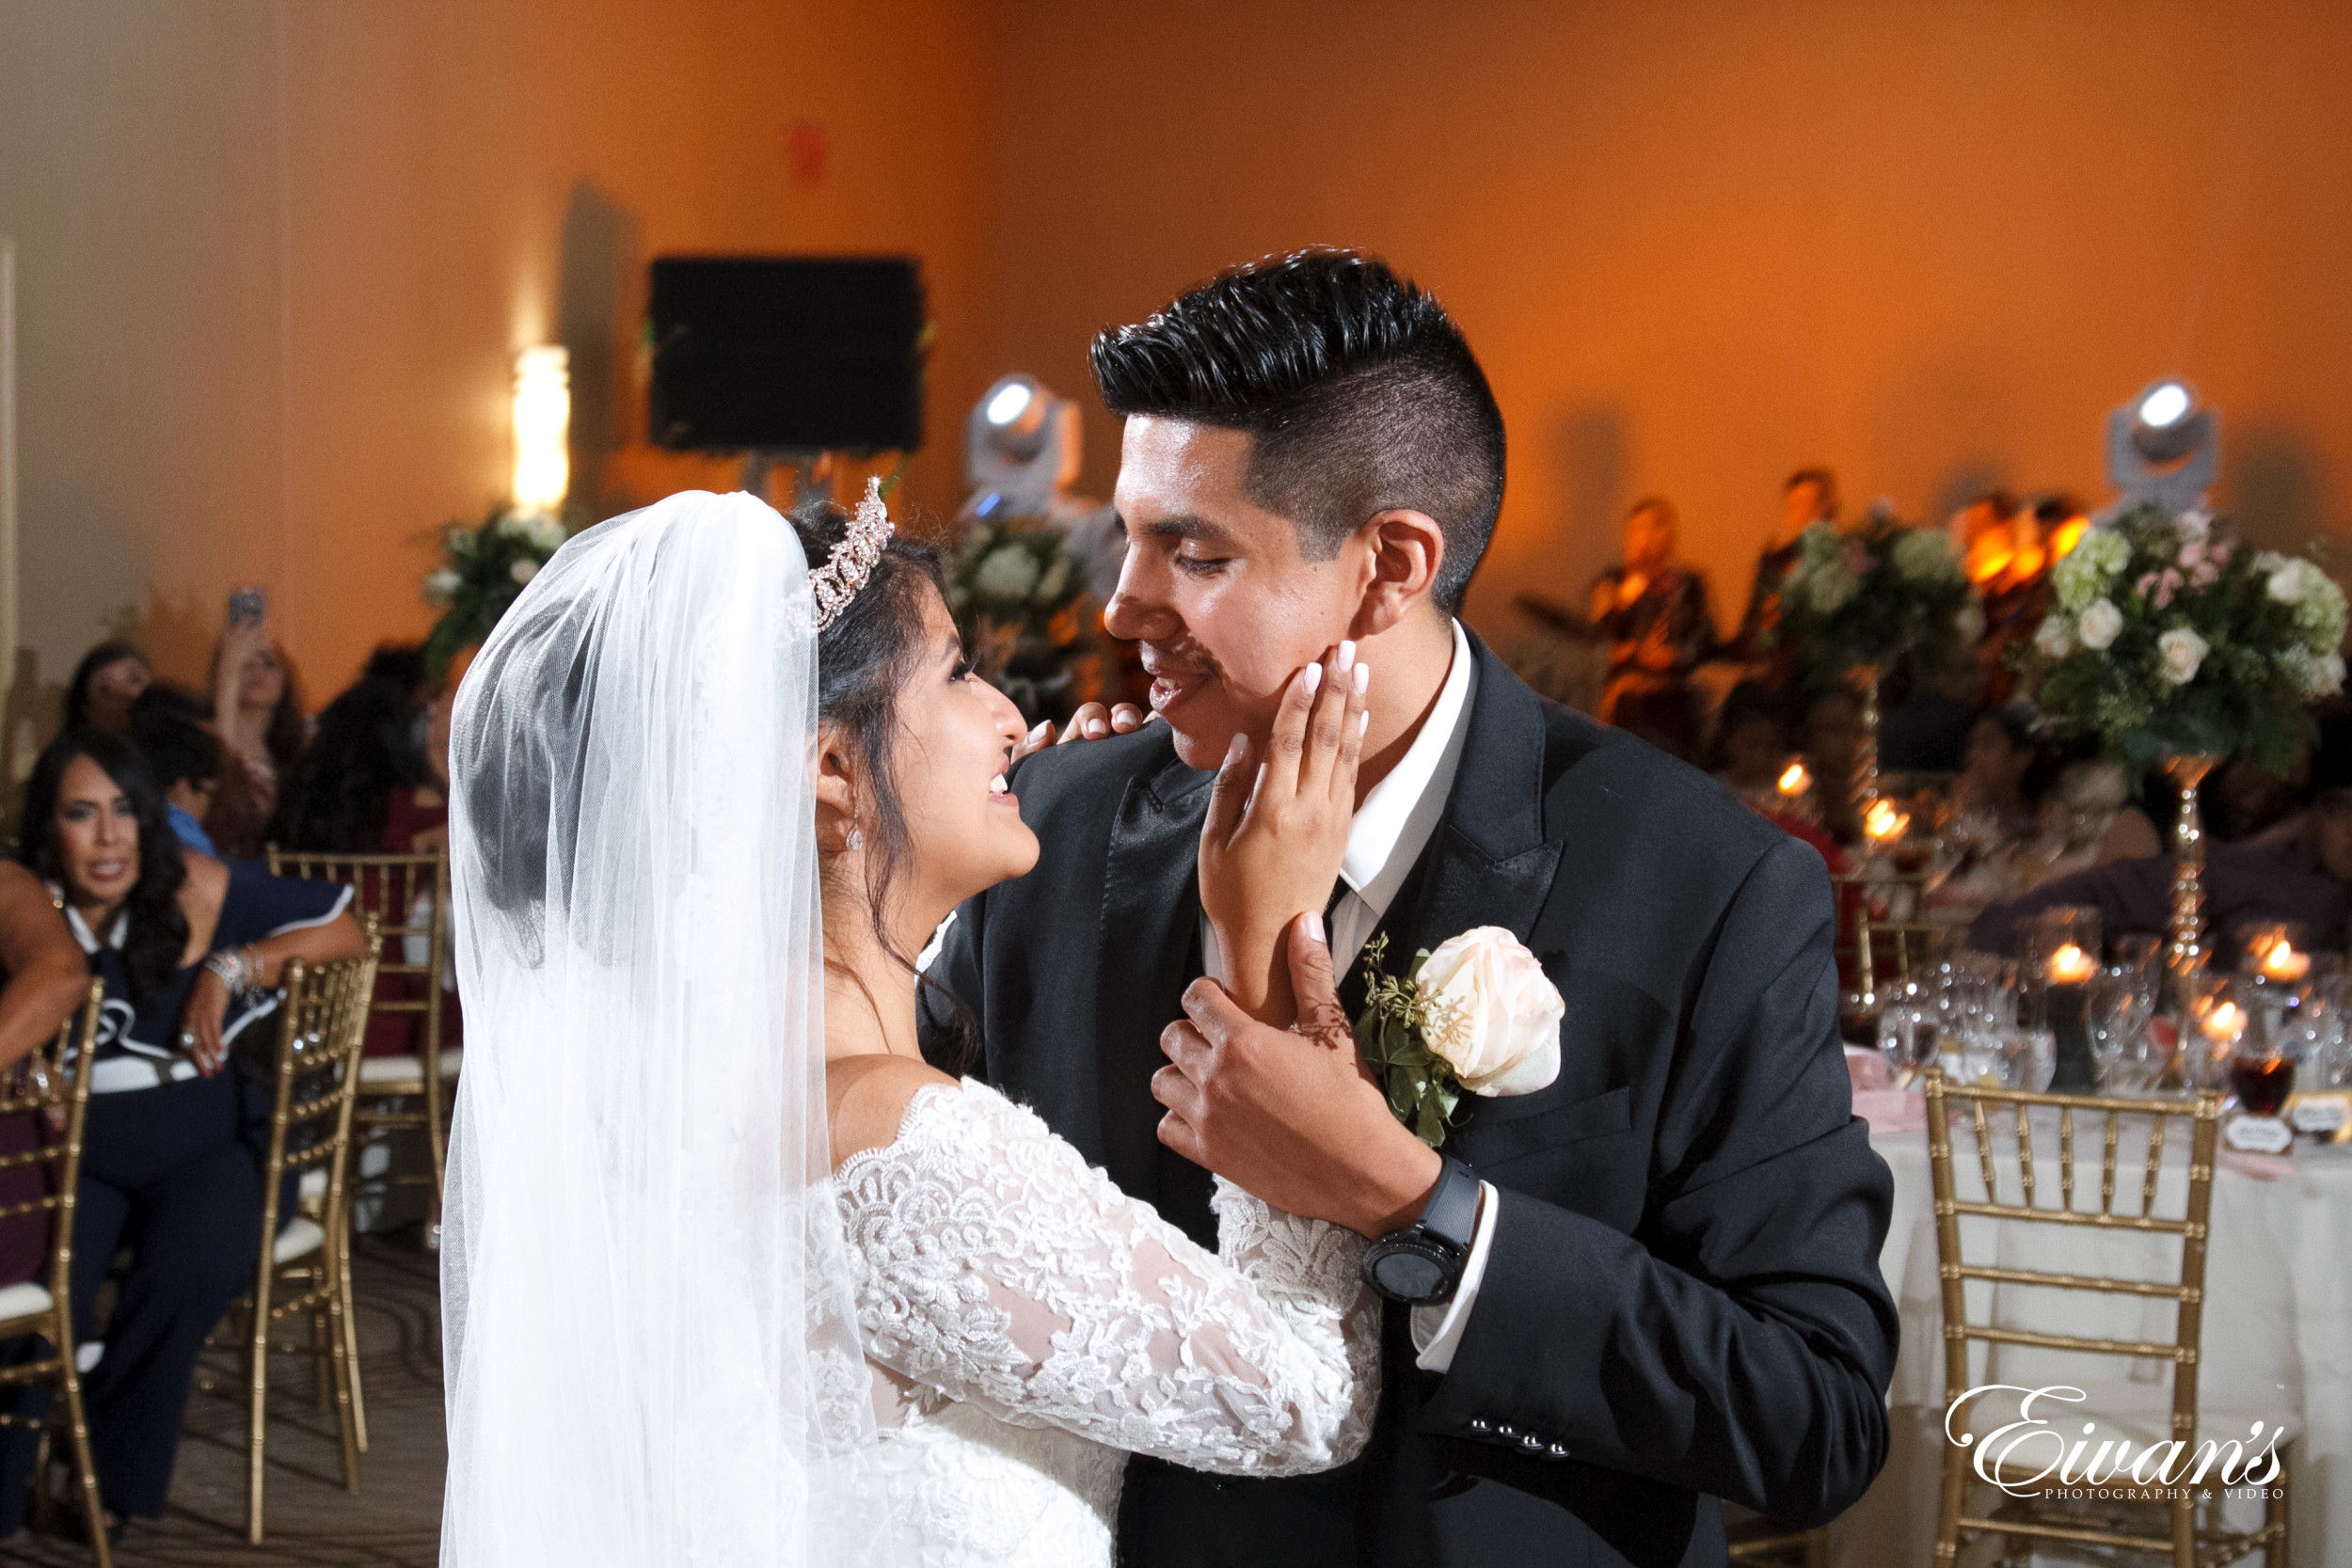 19 Main Mexican Wedding Traditions Explained With Images